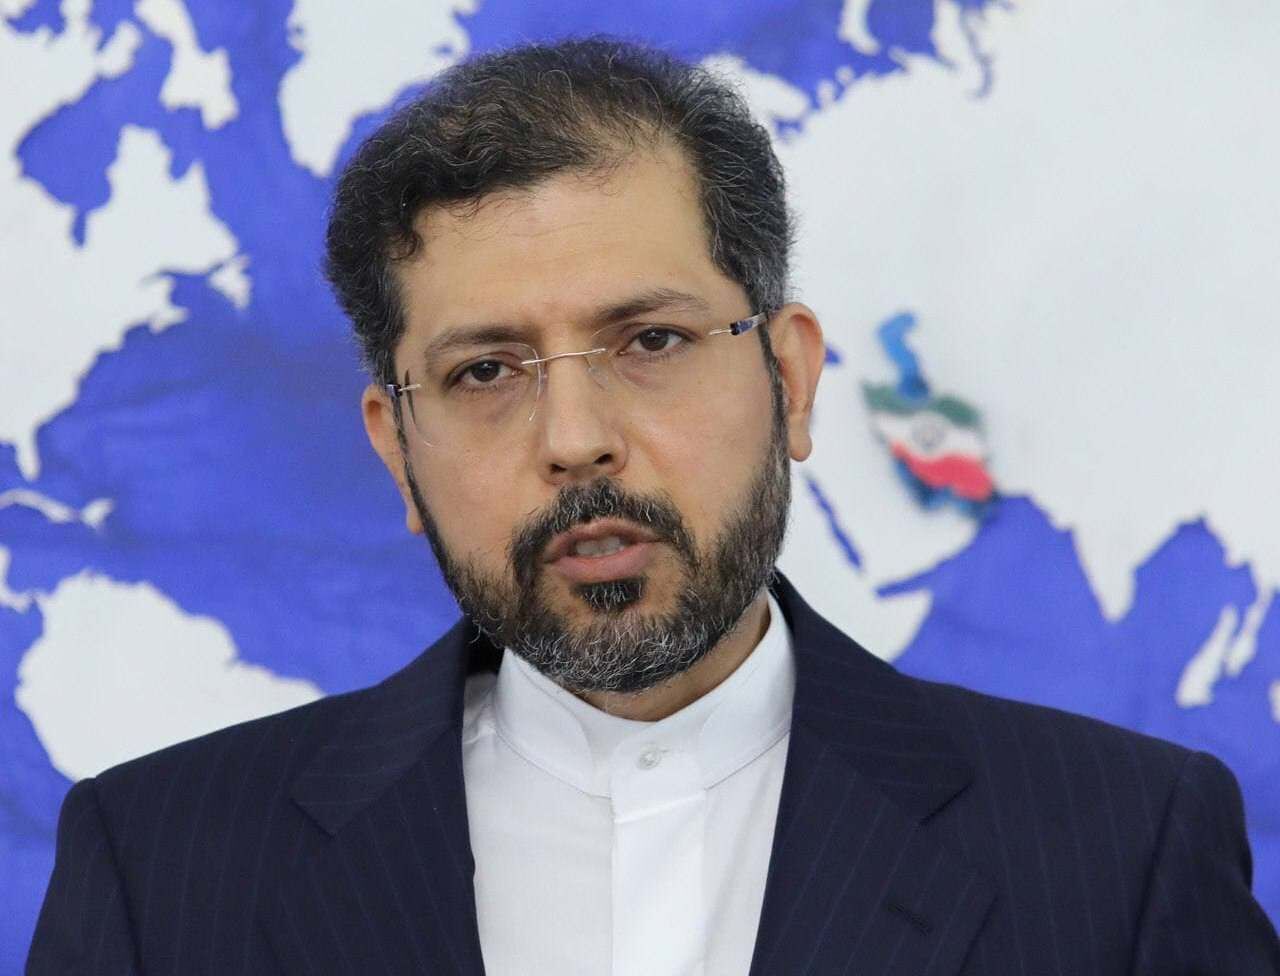 Iran says UK recent incidents should be seriously dealt with